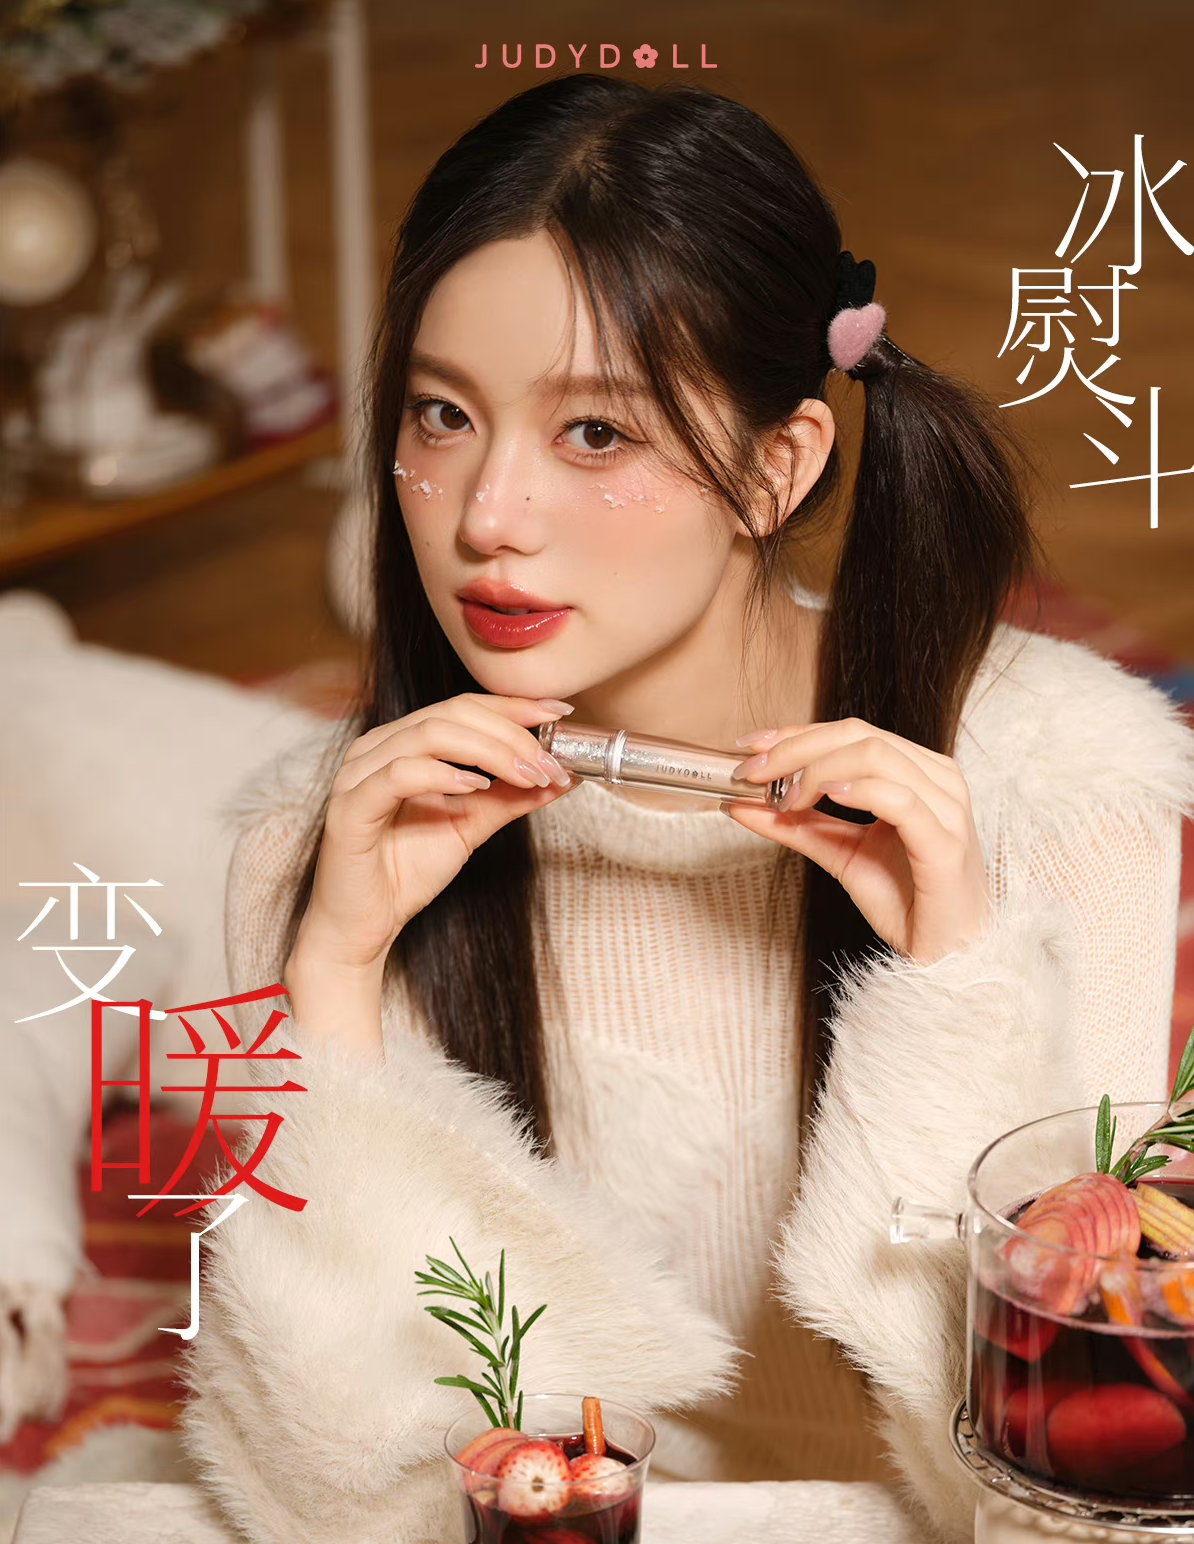 The success of C-beauty brands stem from the power of TikTok and related fun contents marketing. Fresh and new brand and product image. Image: Judydoll Weibo